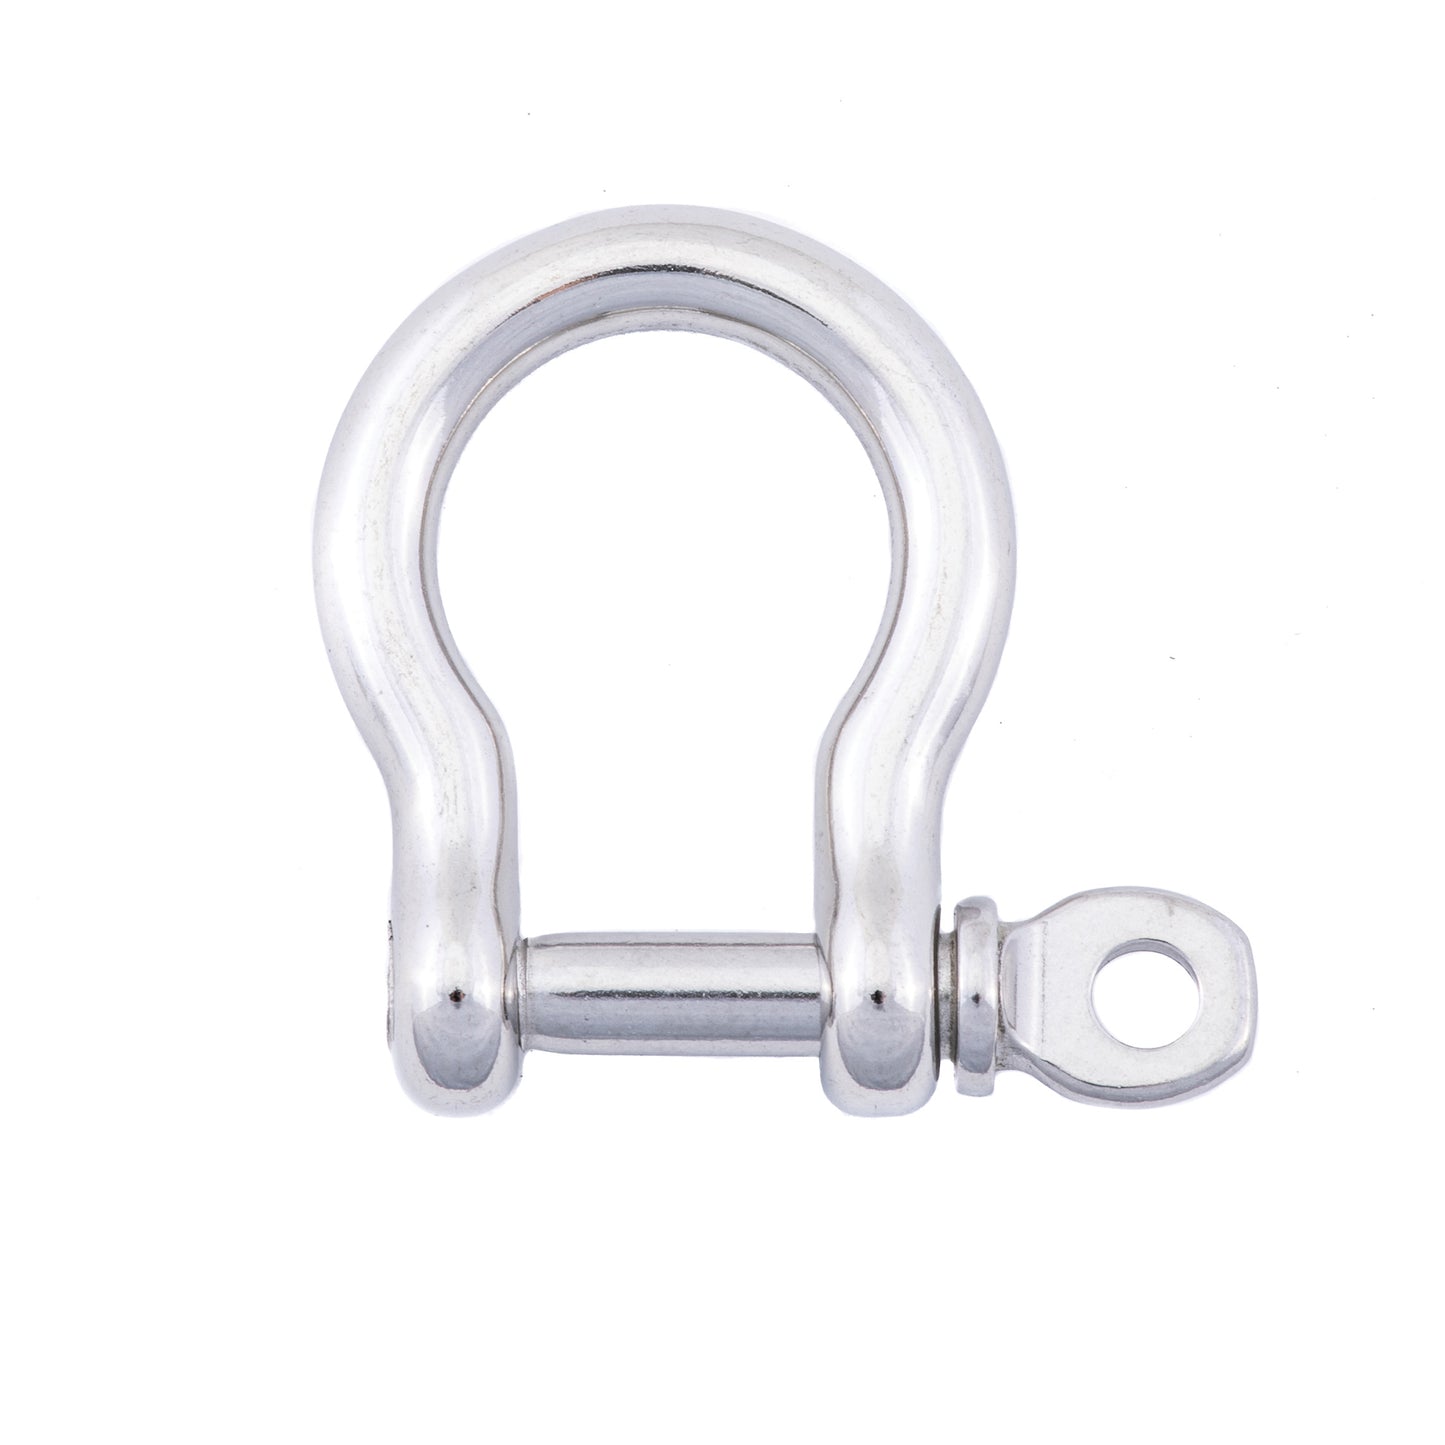 3/16" Stainless Steel Shackle